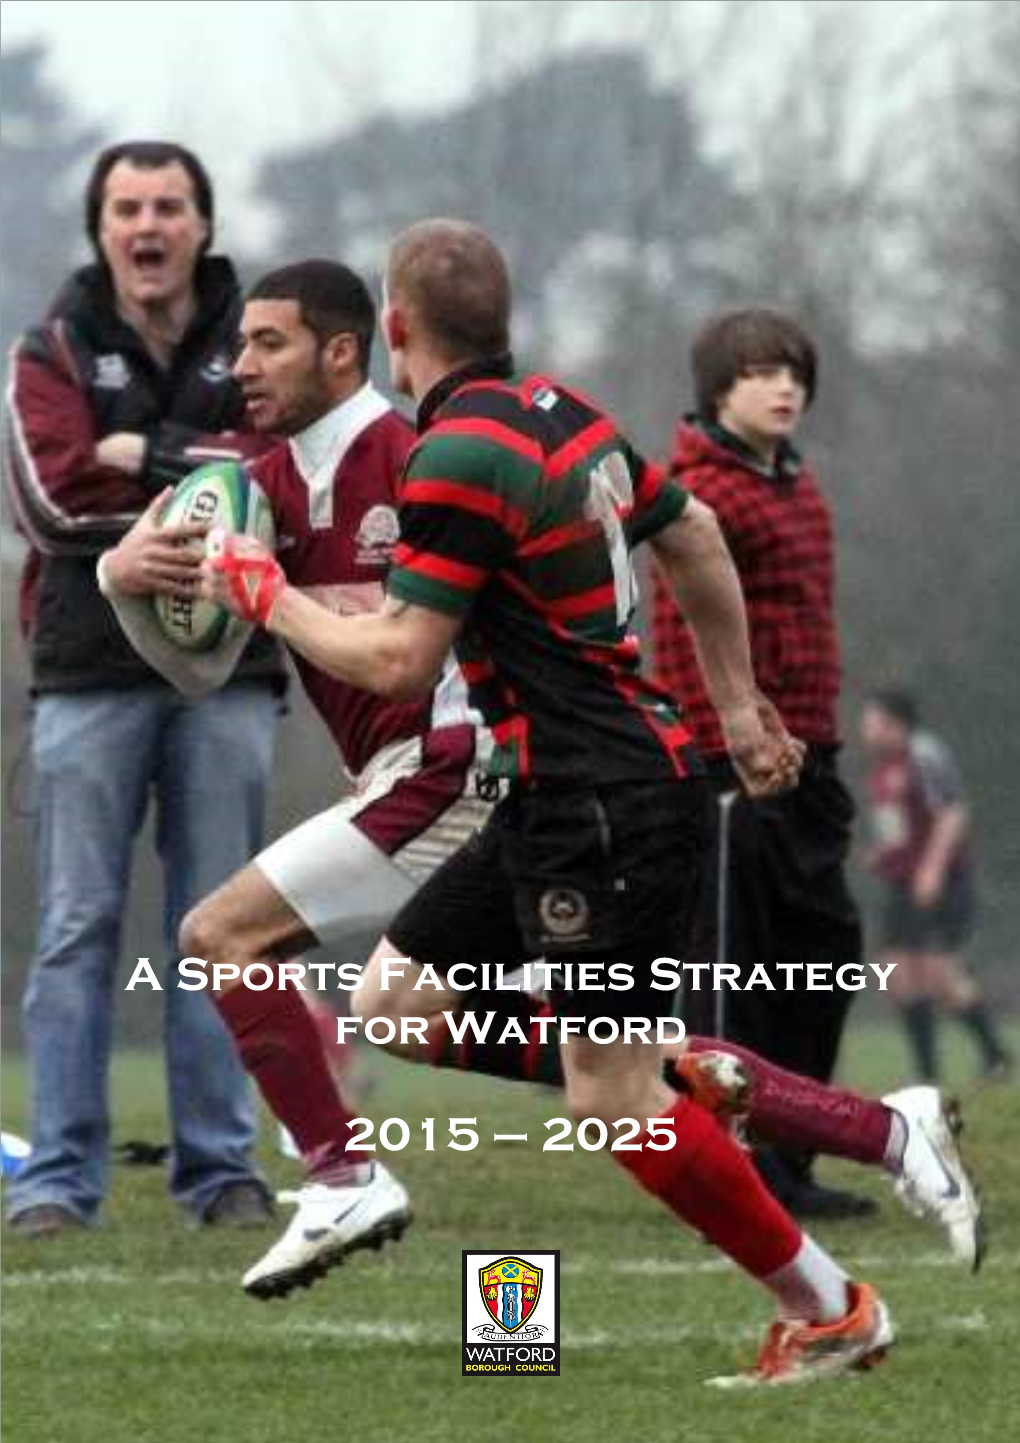 A Sports Facilities Strategy for Watford